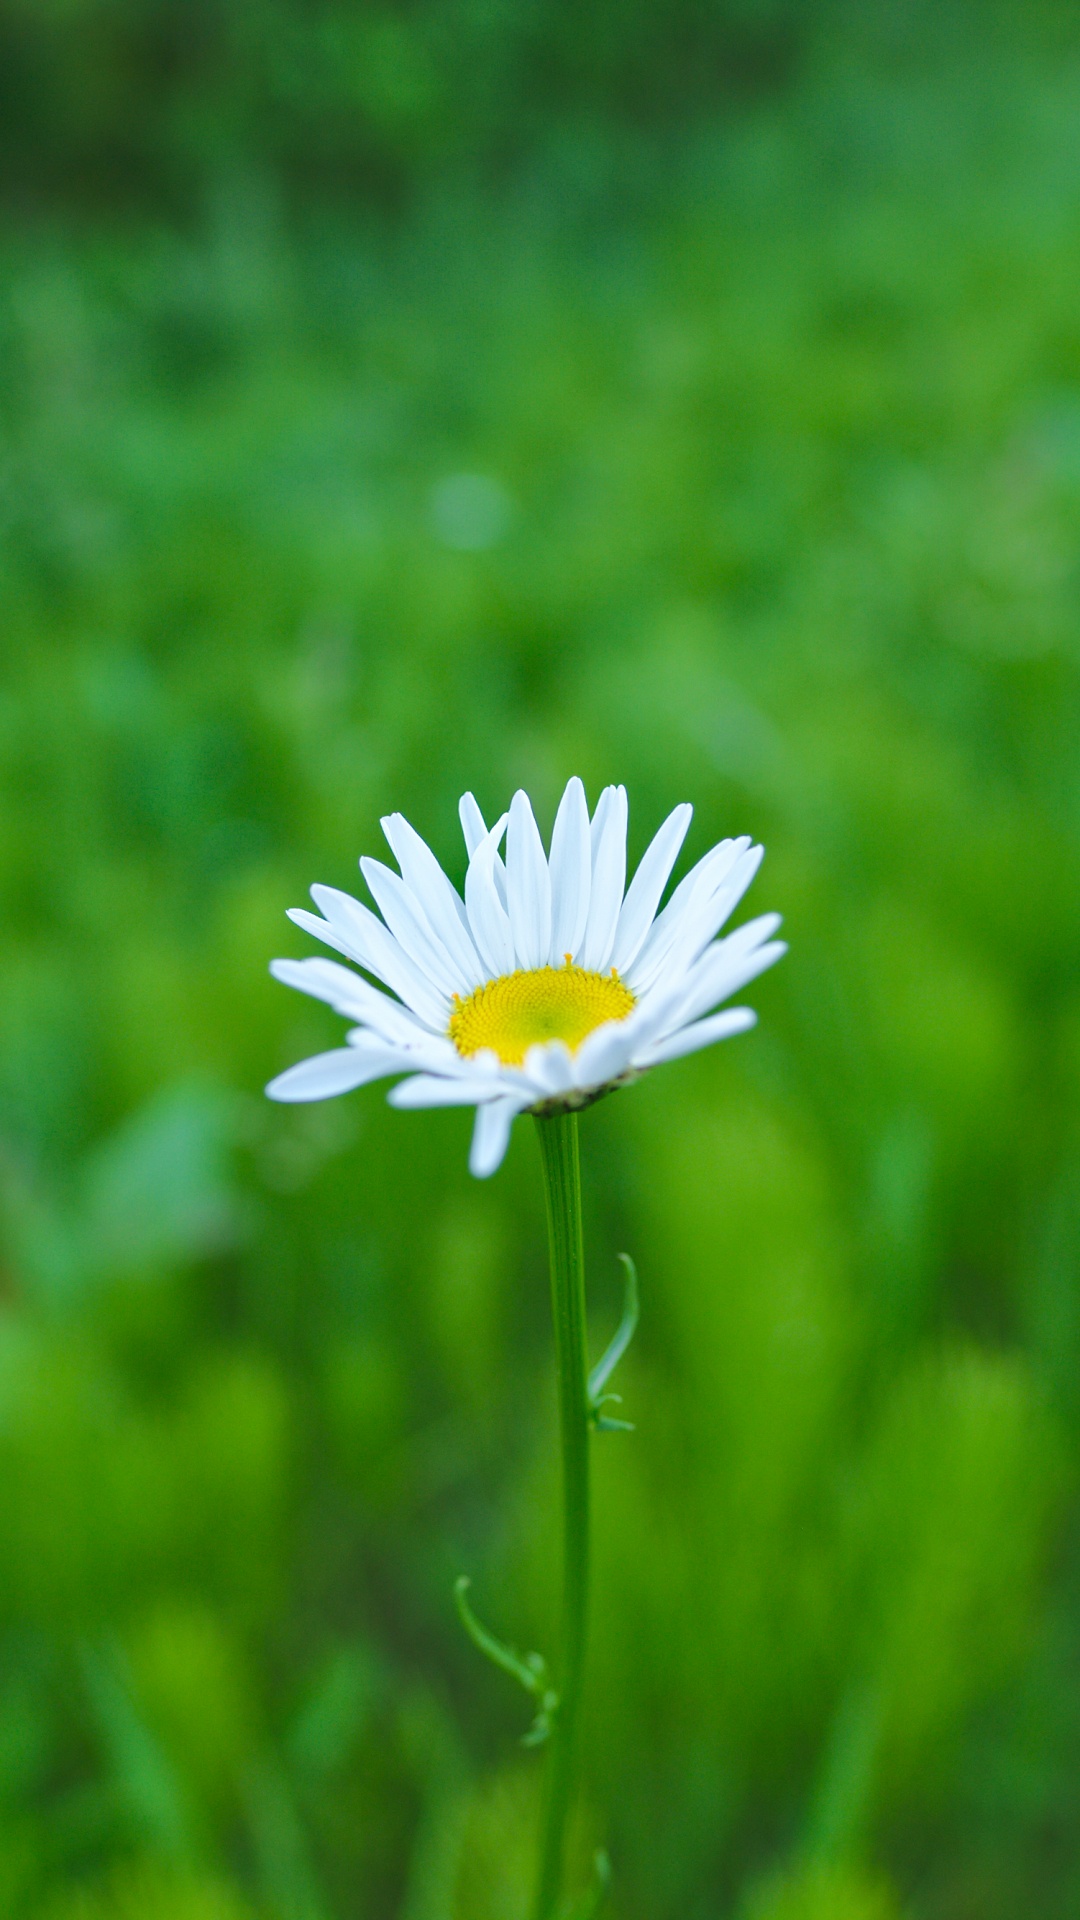 White Daisy in Bloom During Daytime. Wallpaper in 1080x1920 Resolution